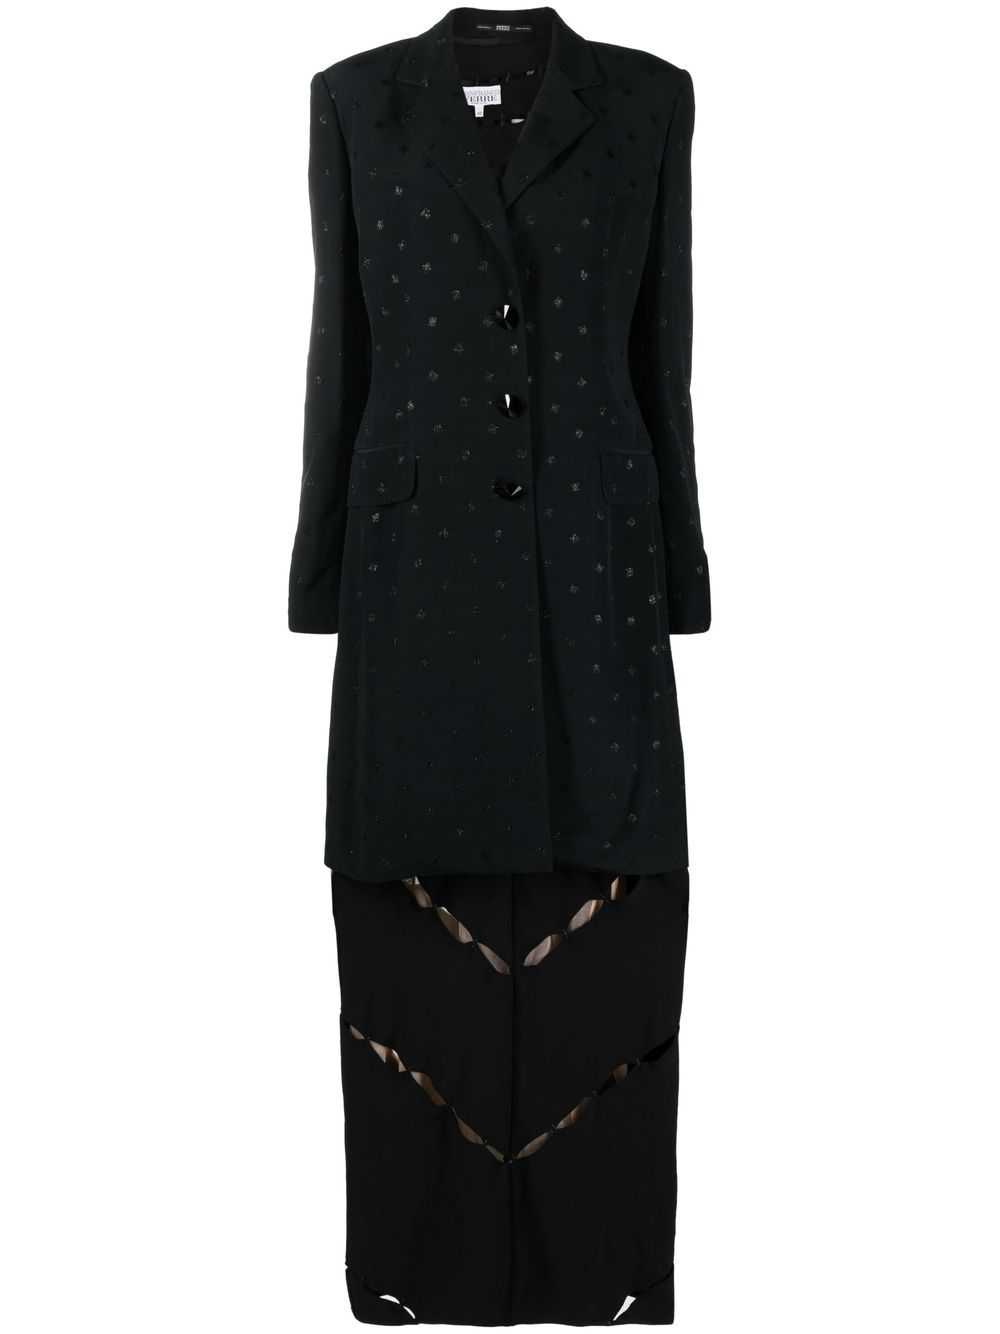 Gianfranco Ferré Pre-Owned 1990s embroidered dres… - image 1